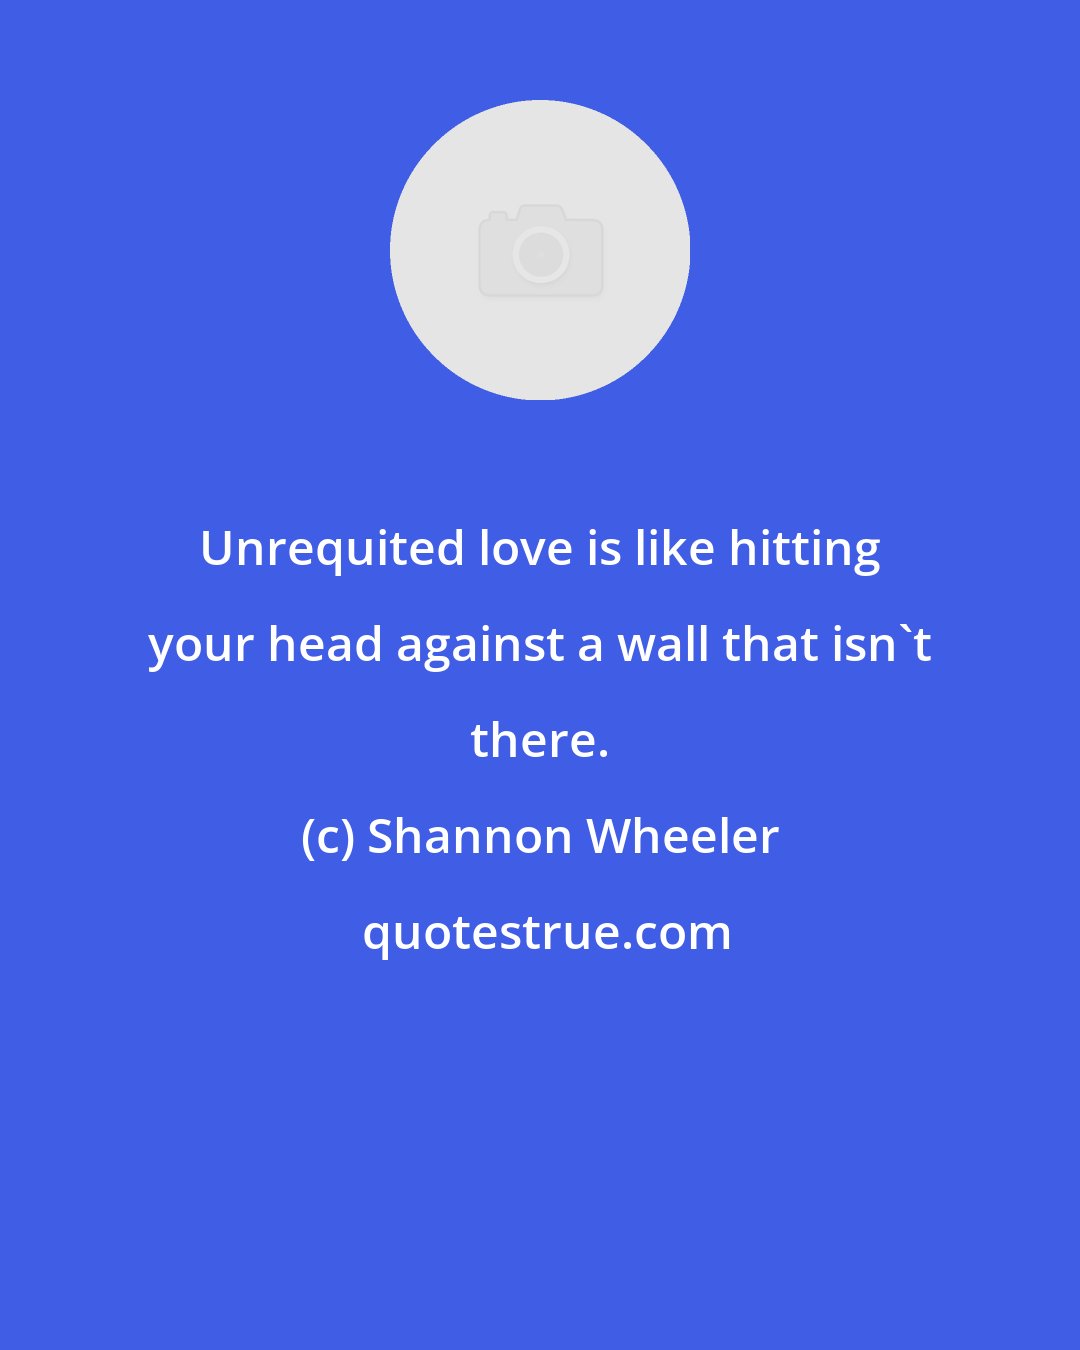 Shannon Wheeler: Unrequited love is like hitting your head against a wall that isn't there.